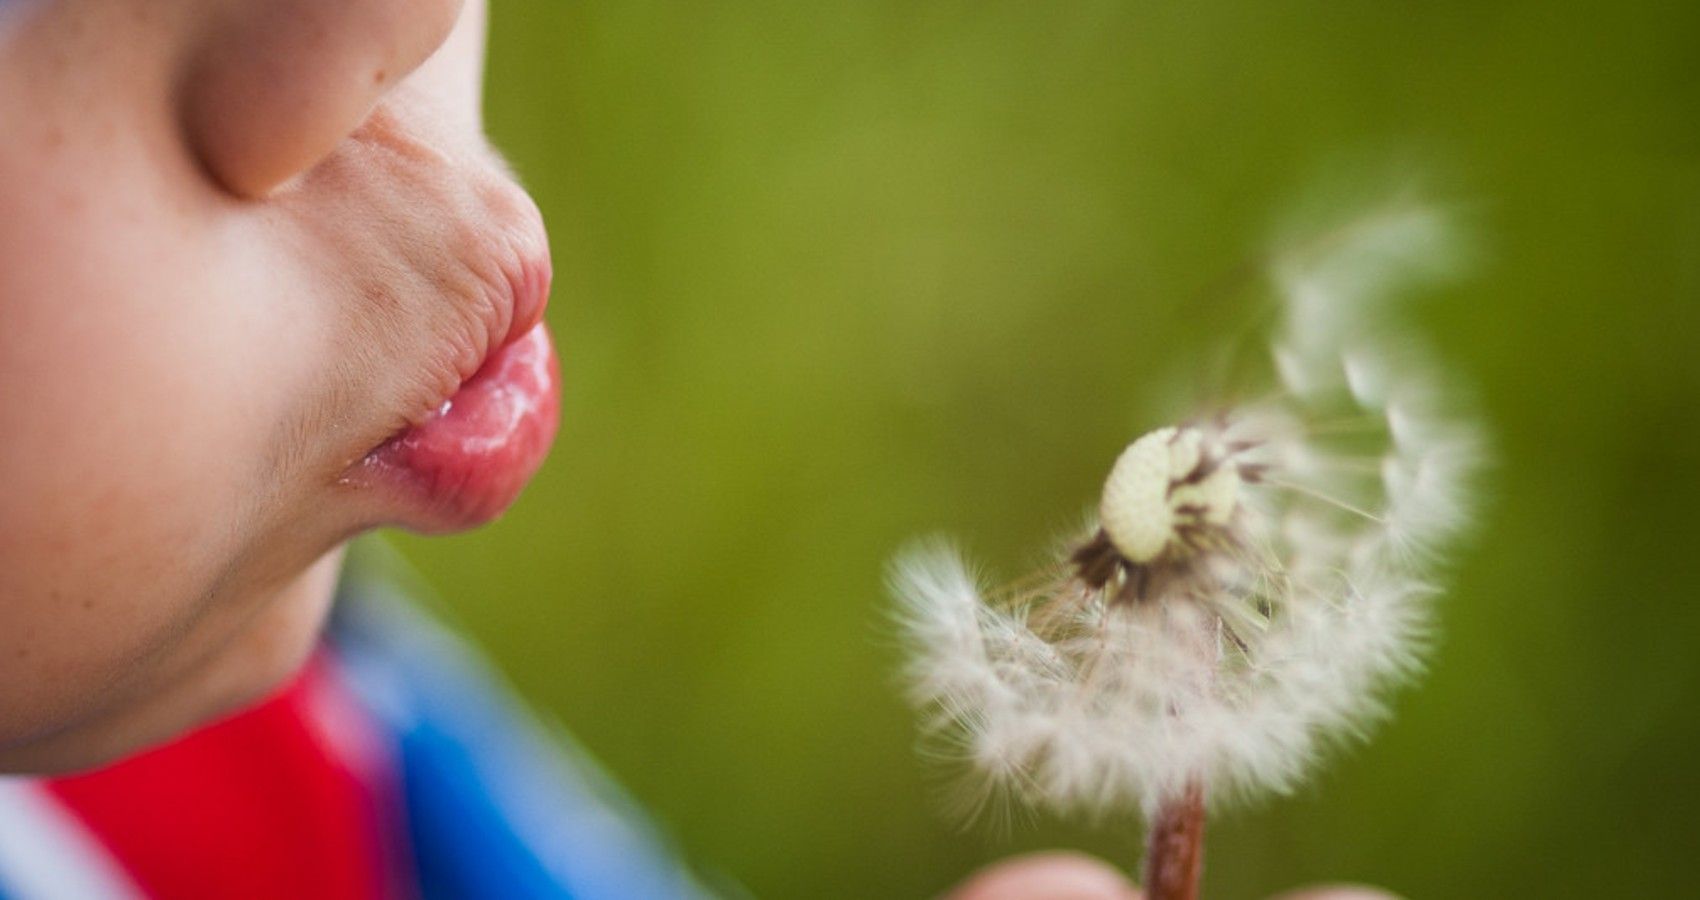 A child making a wish with a dandelion